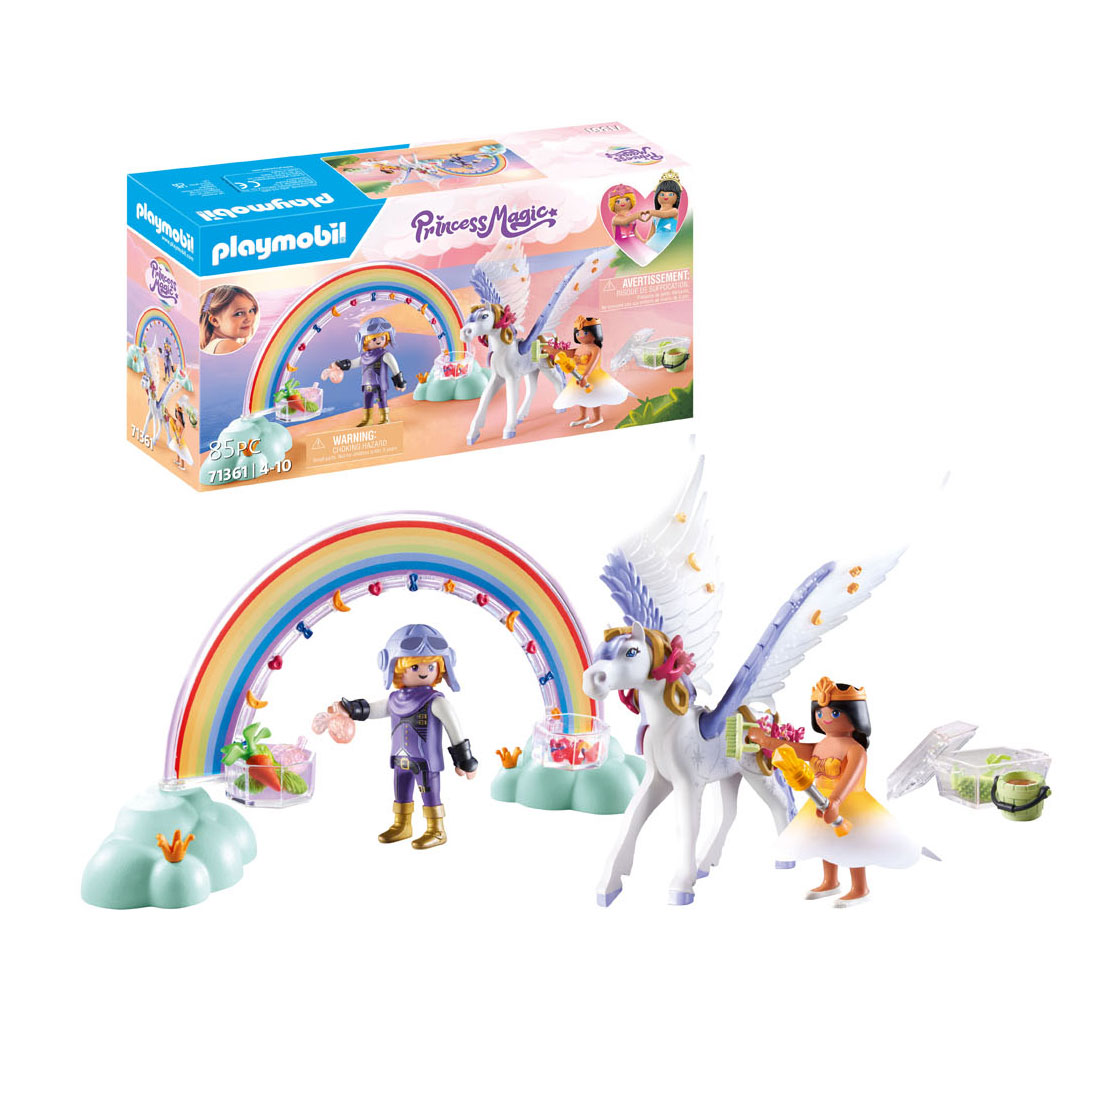 Playmobil Princess Magic: Rainbow Castle in the Clouds 71359